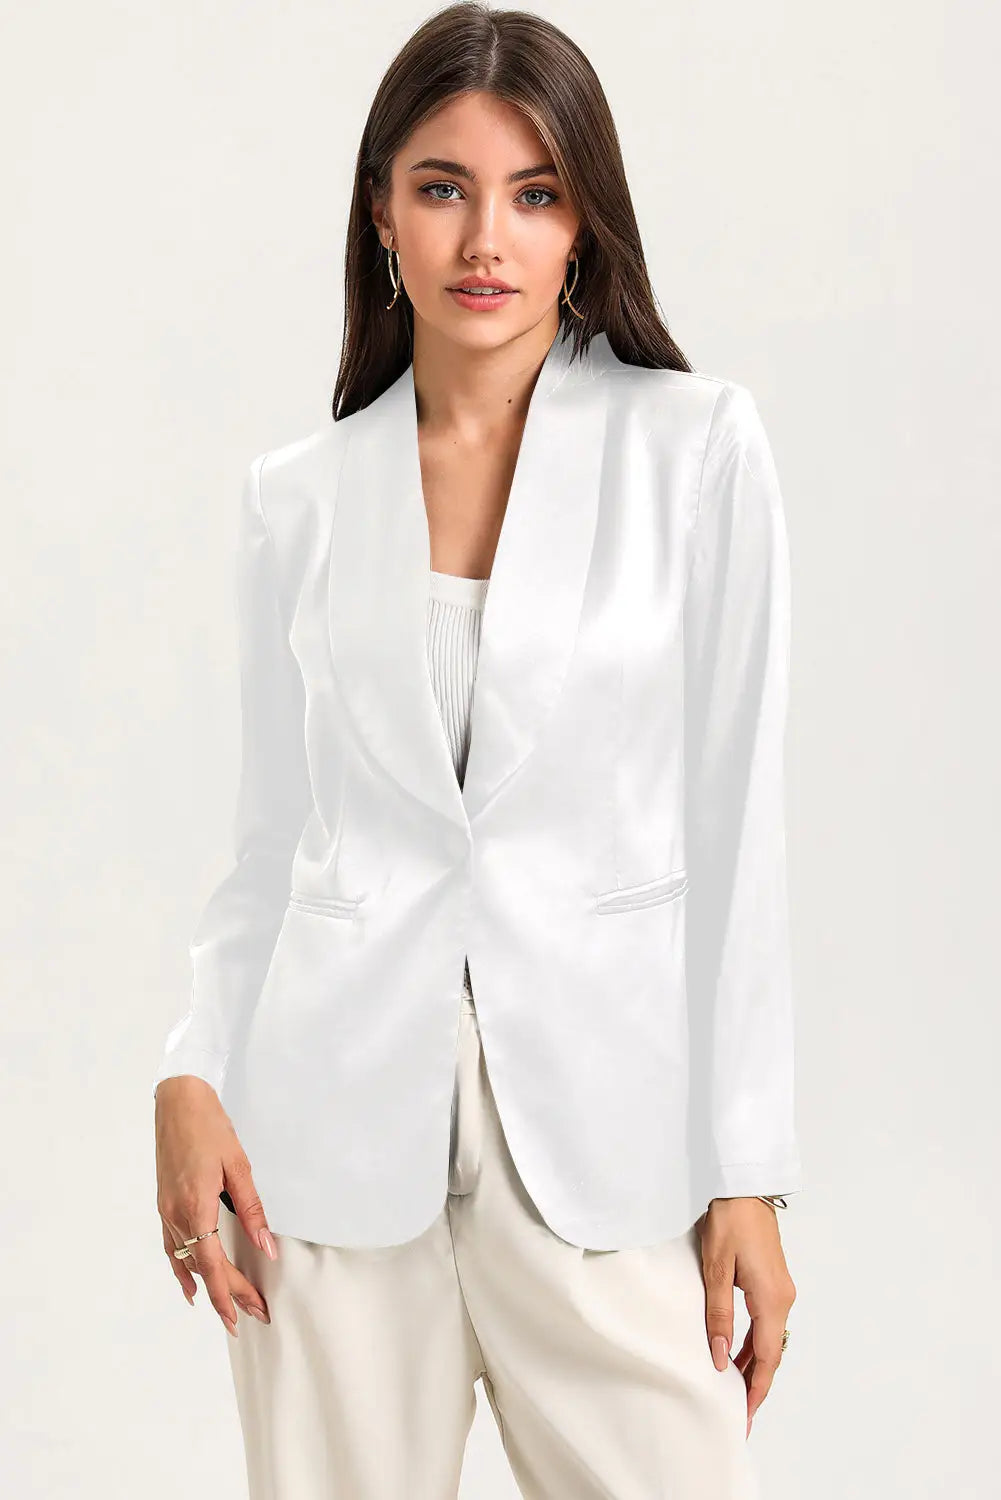 Black collared neck single breasted blazer with pockets - white / s / 90% polyester + 10% elastane - blazers